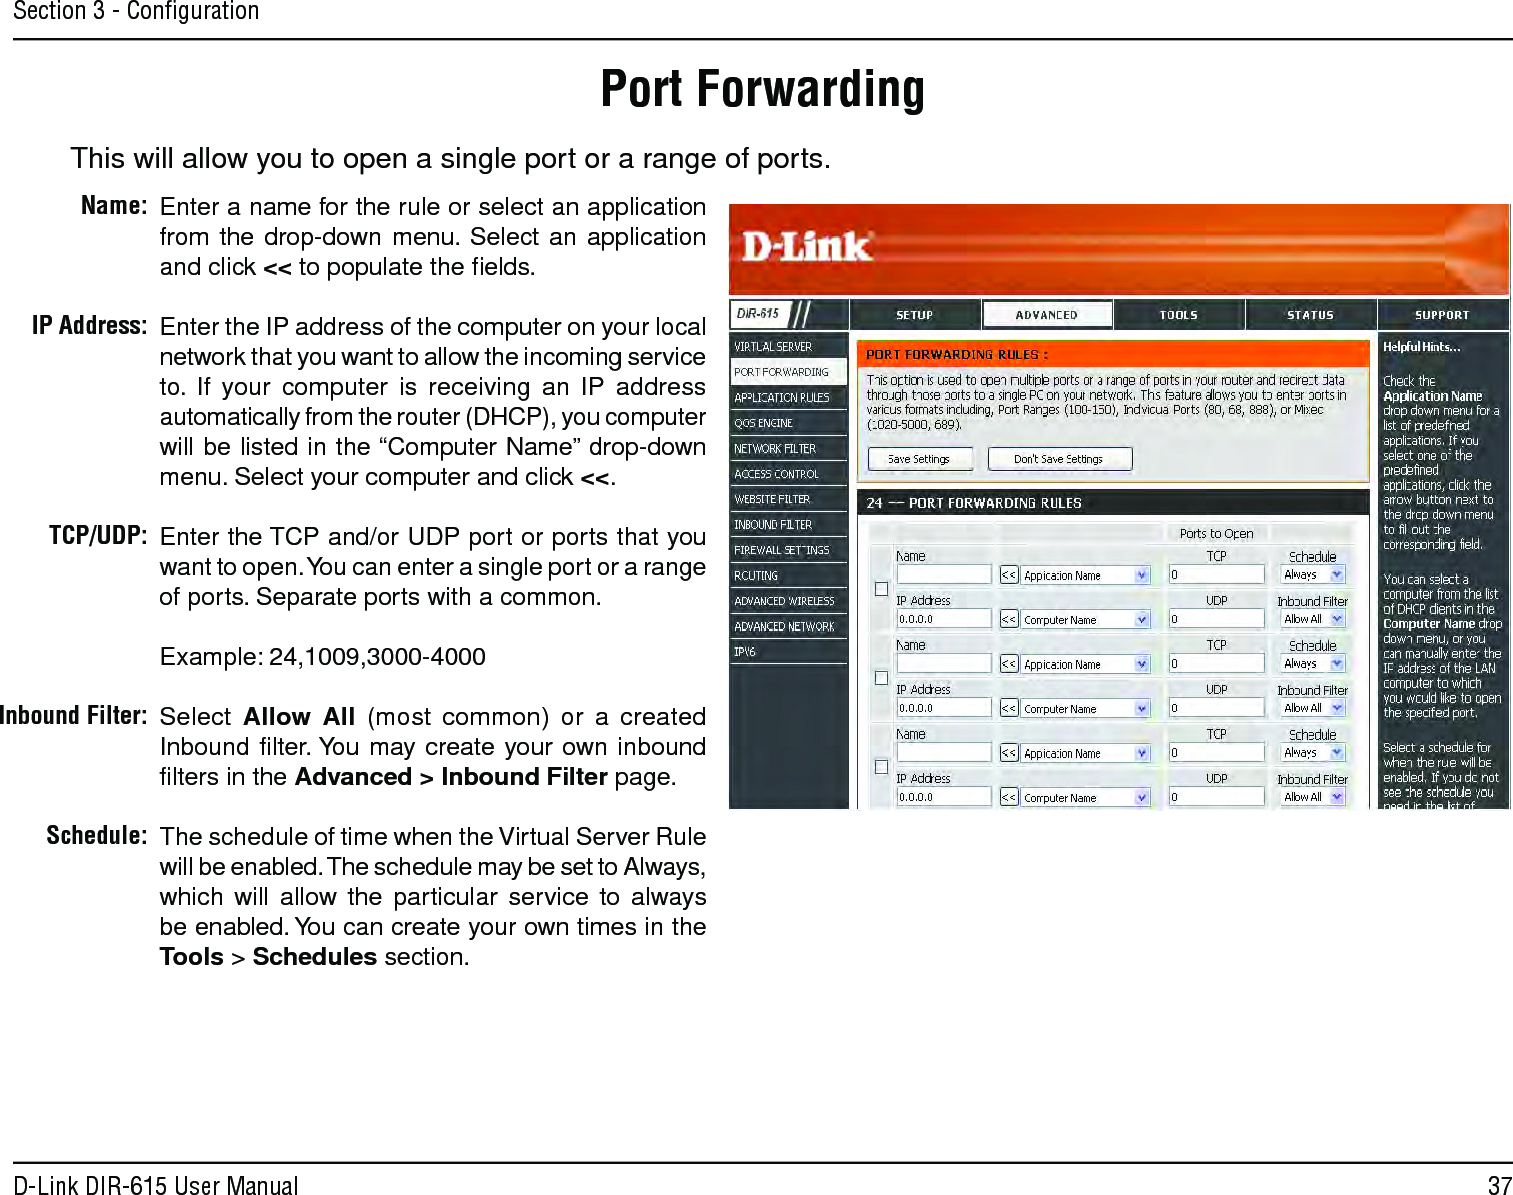 37D-Link DIR-615 User ManualSection 3 - ConﬁgurationThis will allow you to open a single port or a range of ports.Port ForwardingEnter a name for the rule or select an application from  the  drop-down menu.  Select an  application and click &lt;&lt; to populate the ﬁelds.Enter the IP address of the computer on your local network that you want to allow the incoming service to.  If  your  computer  is  receiving  an  IP  address automatically from the router (DHCP), you computer will be listed in the “Computer Name” drop-down menu. Select your computer and click &lt;&lt;. Enter the TCP and/or UDP port or ports that you want to open. You can enter a single port or a range of ports. Separate ports with a common.Example: 24,1009,3000-4000Select  Allow  All  (most  common)  or  a  created Inbound ﬁlter. You may create  your  own inbound ﬁlters in the Advanced &gt; Inbound Filter page.The schedule of time when the Virtual Server Rule will be enabled. The schedule may be set to Always, which  will  allow  the  particular  service  to  always be enabled. You can create your own times in the  Tools &gt; Schedules section.Name:IP Address:TCP/UDP:Inbound Filter:Schedule: